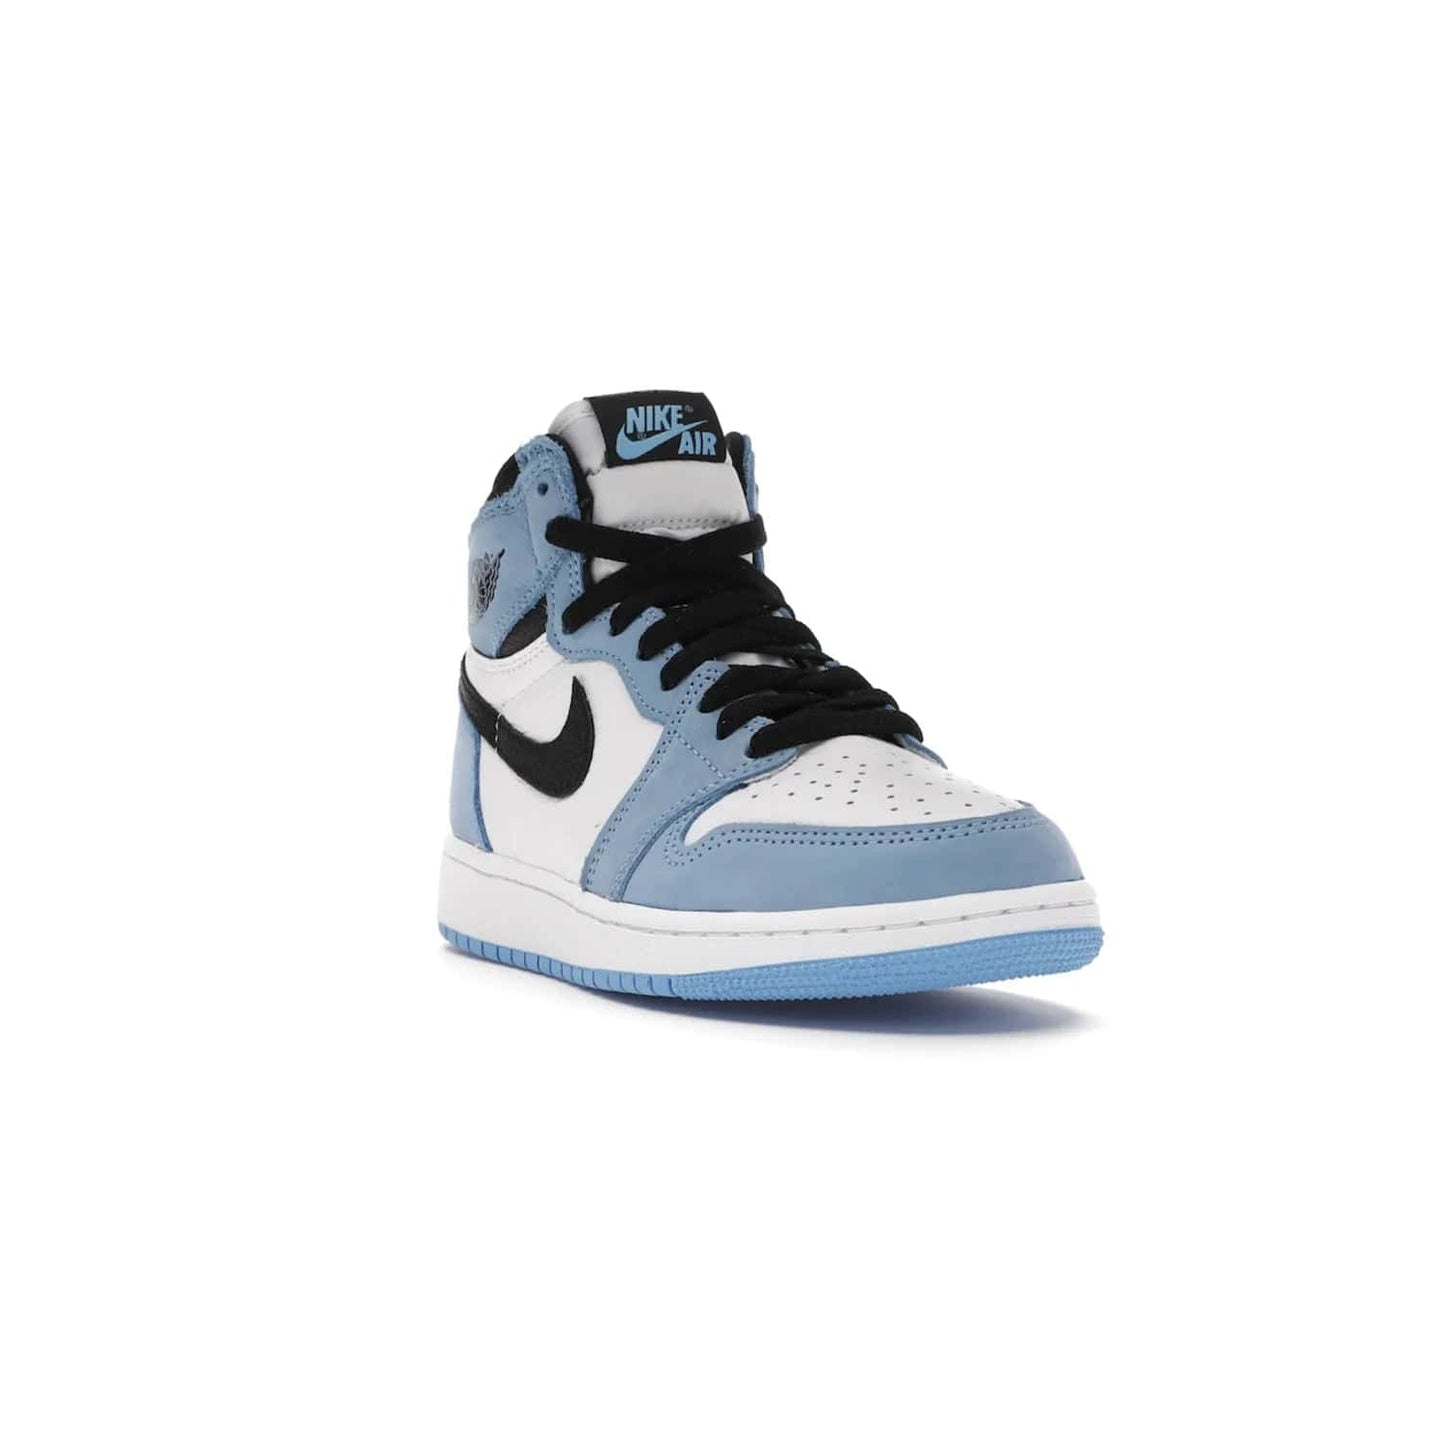 Jordan 1 Retro High White University Blue Black (GS) - Image 7 - Only at www.BallersClubKickz.com - Air Jordan 1 Retro High White University Blue Black GS: the latest offering from the iconic Air Jordan 1 line. White tumbled leather upper with University Blue overlays and black detailing. University Blue outsole and white midsole. March 6 release.